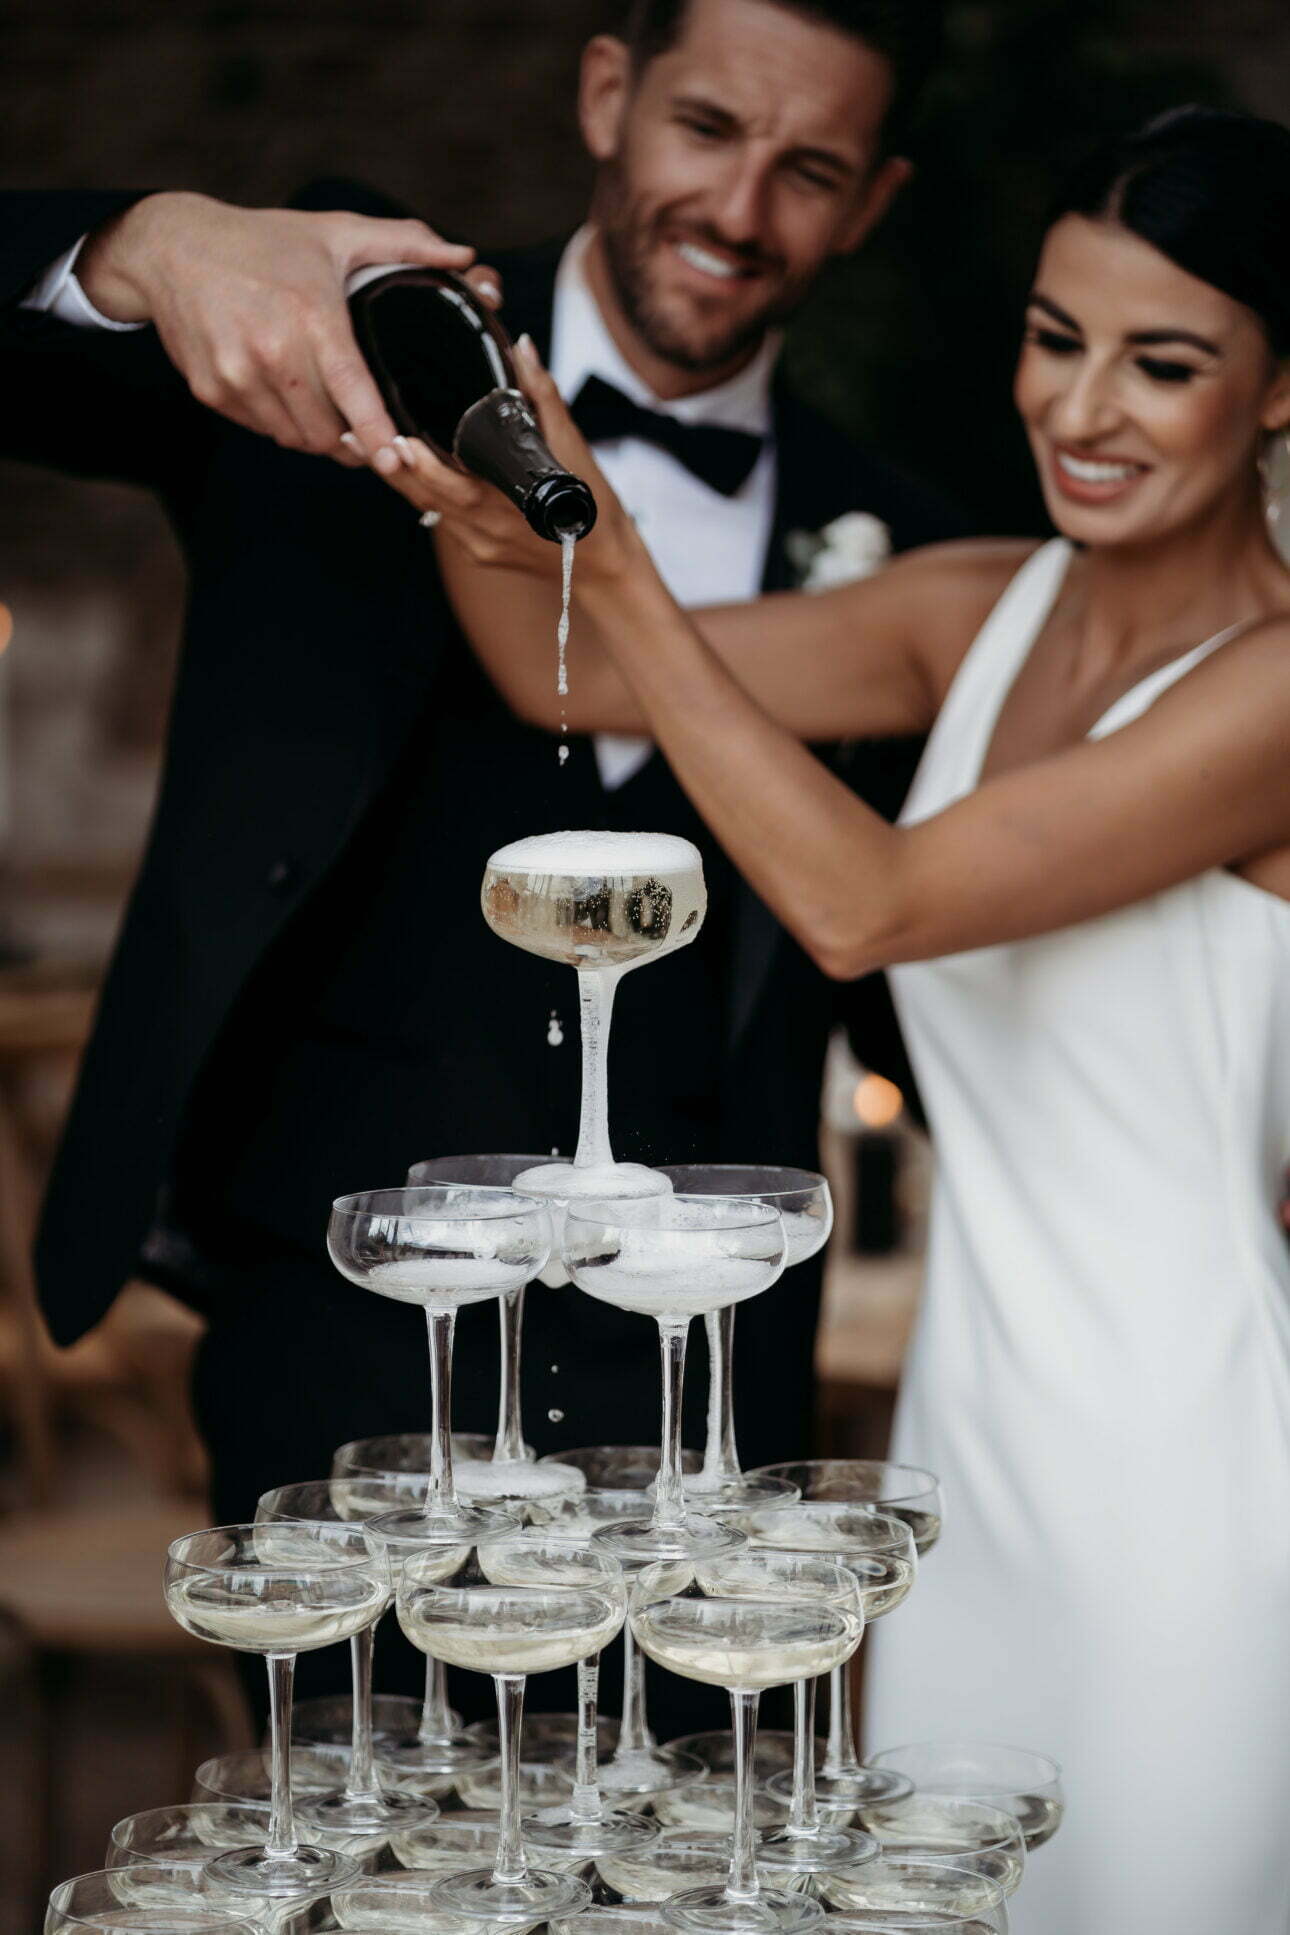 A top tip for a perfect champagne tower wedding photograph is to stay close together and snuggle up